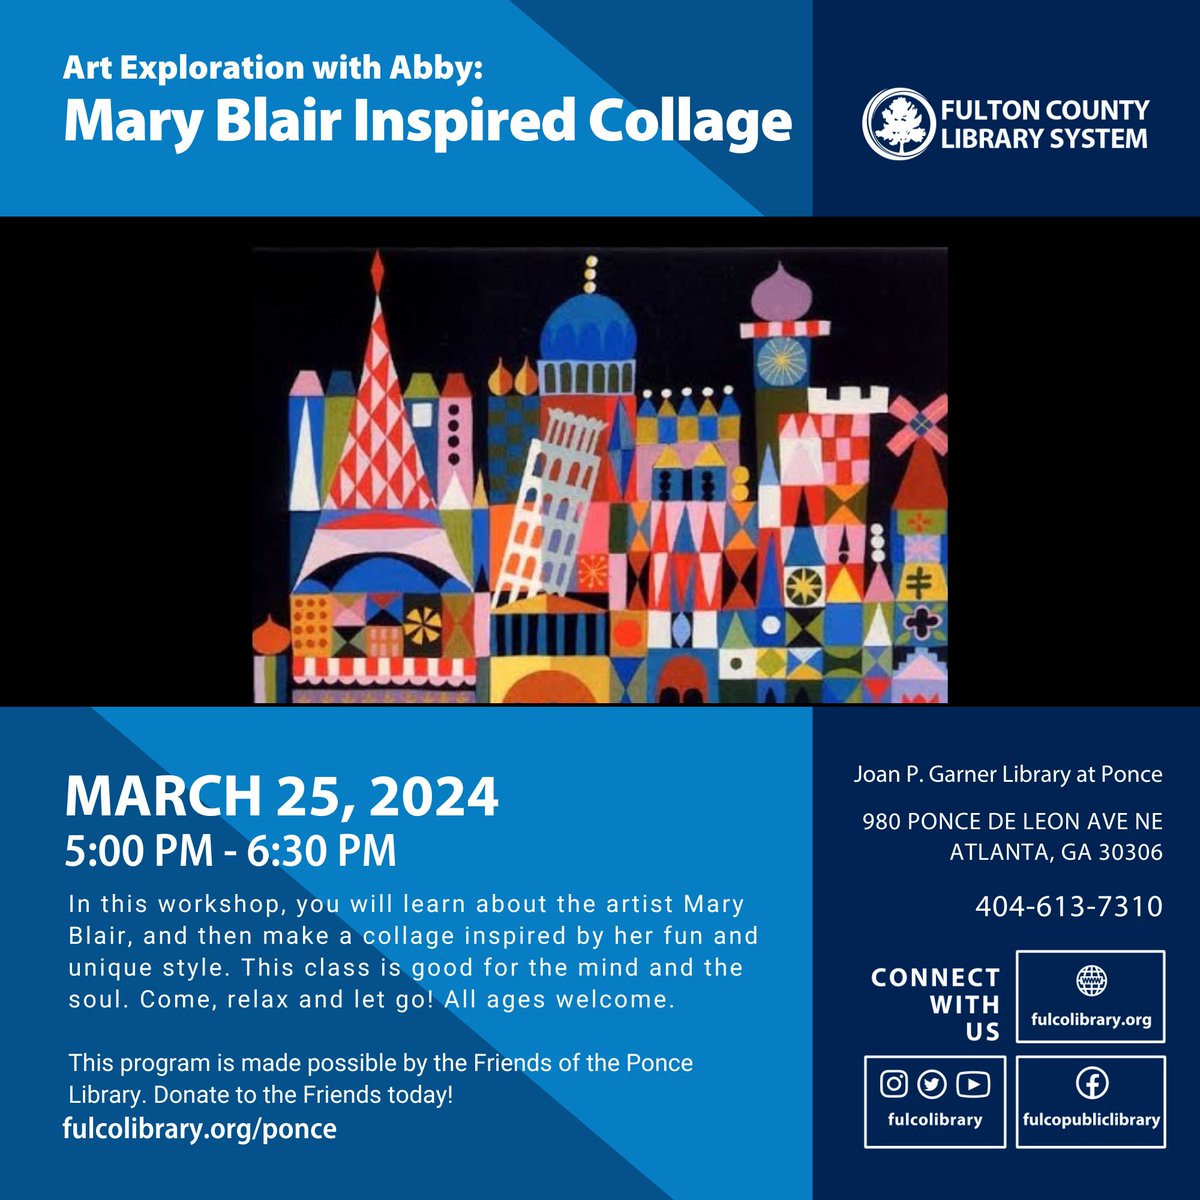 Learn about the artist Mary Blair, and then make a collage inspired by her fun and unique style. This class is good for the mind and the soul. Come, relax, and let go! All ages welcome.

tinyurl.com/yj7datu2

#FulcoLibrary #ResolveToRead #LibrariesTransform #FulcoReads